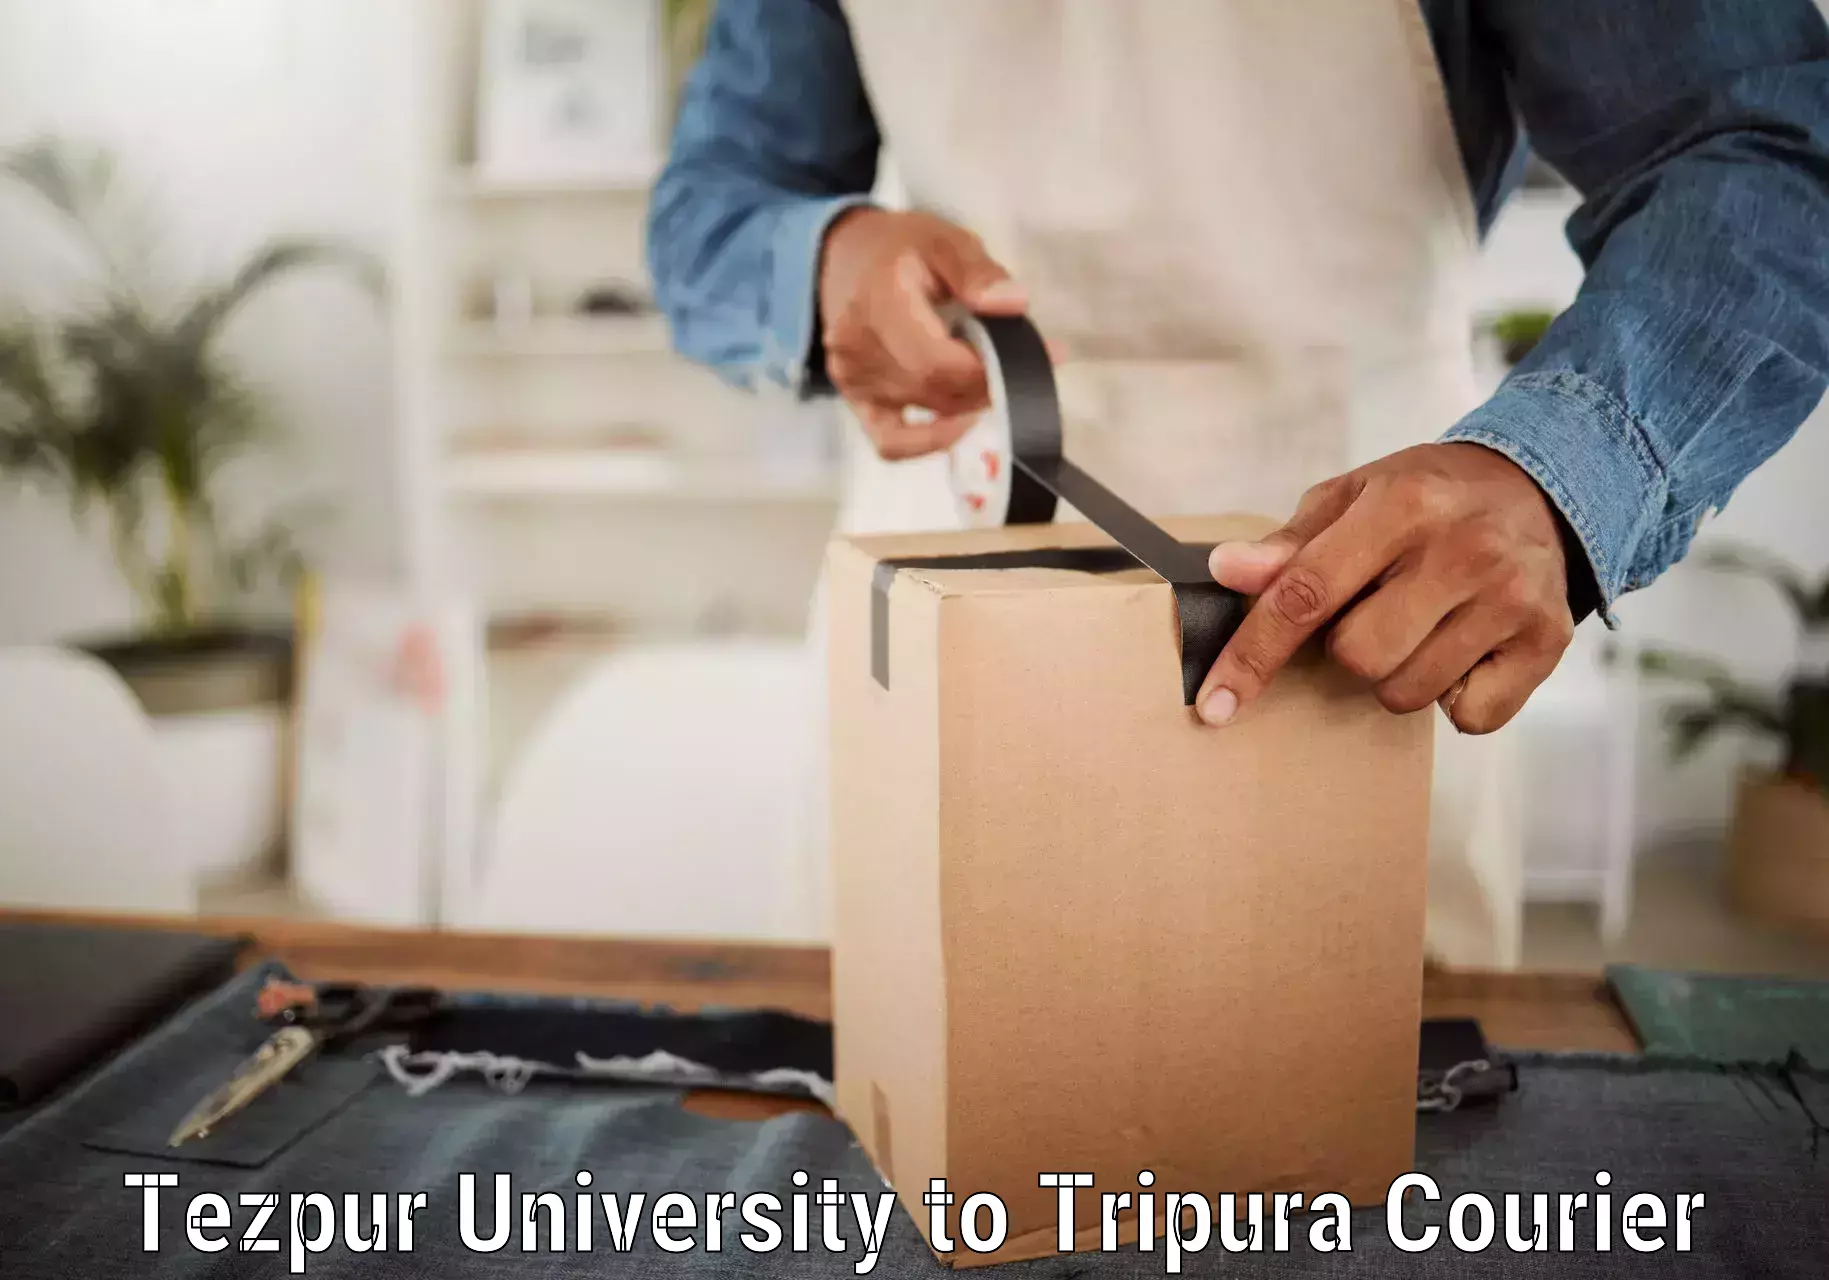 Next day courier in Tezpur University to Udaipur Tripura